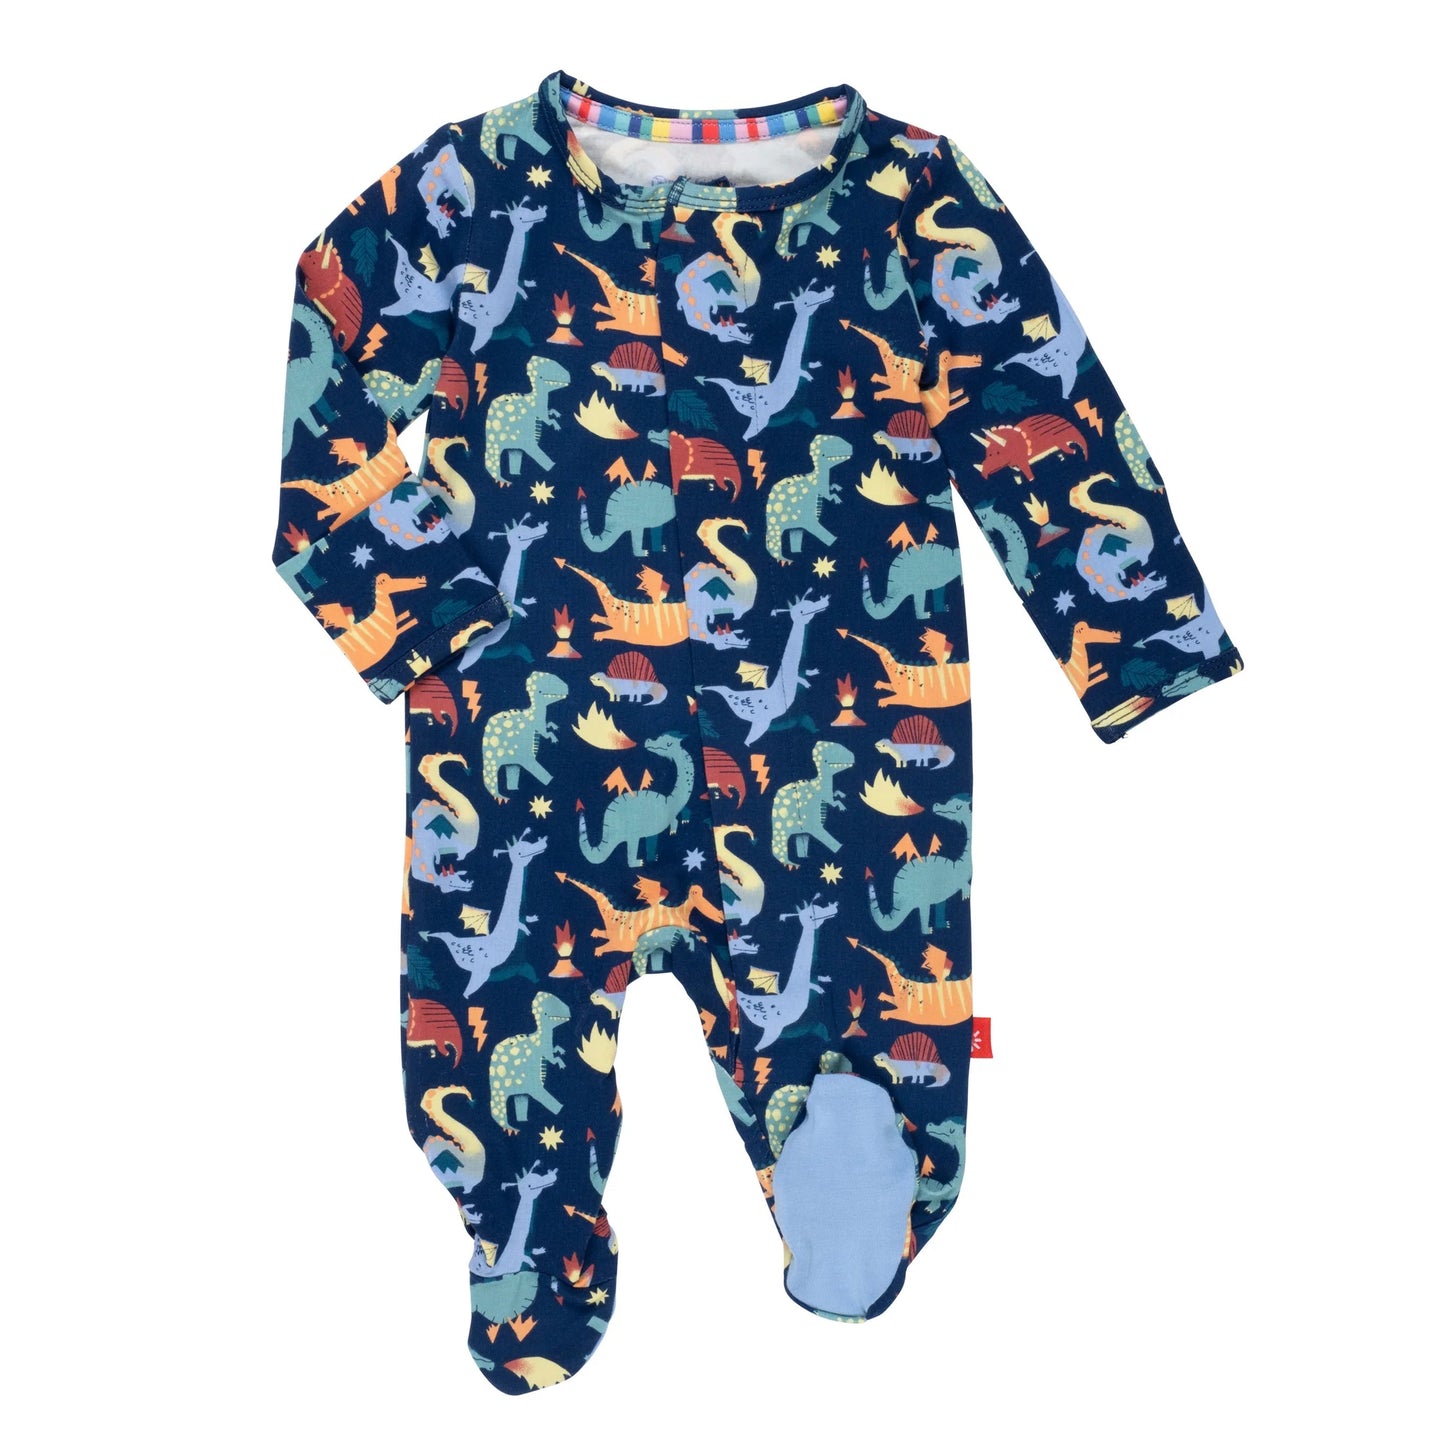 An easy dressing Talon-Ted Magnetic Footie Pajama with dinosaurs on it made from GOTS certified organic cotton by Magnetic Me!